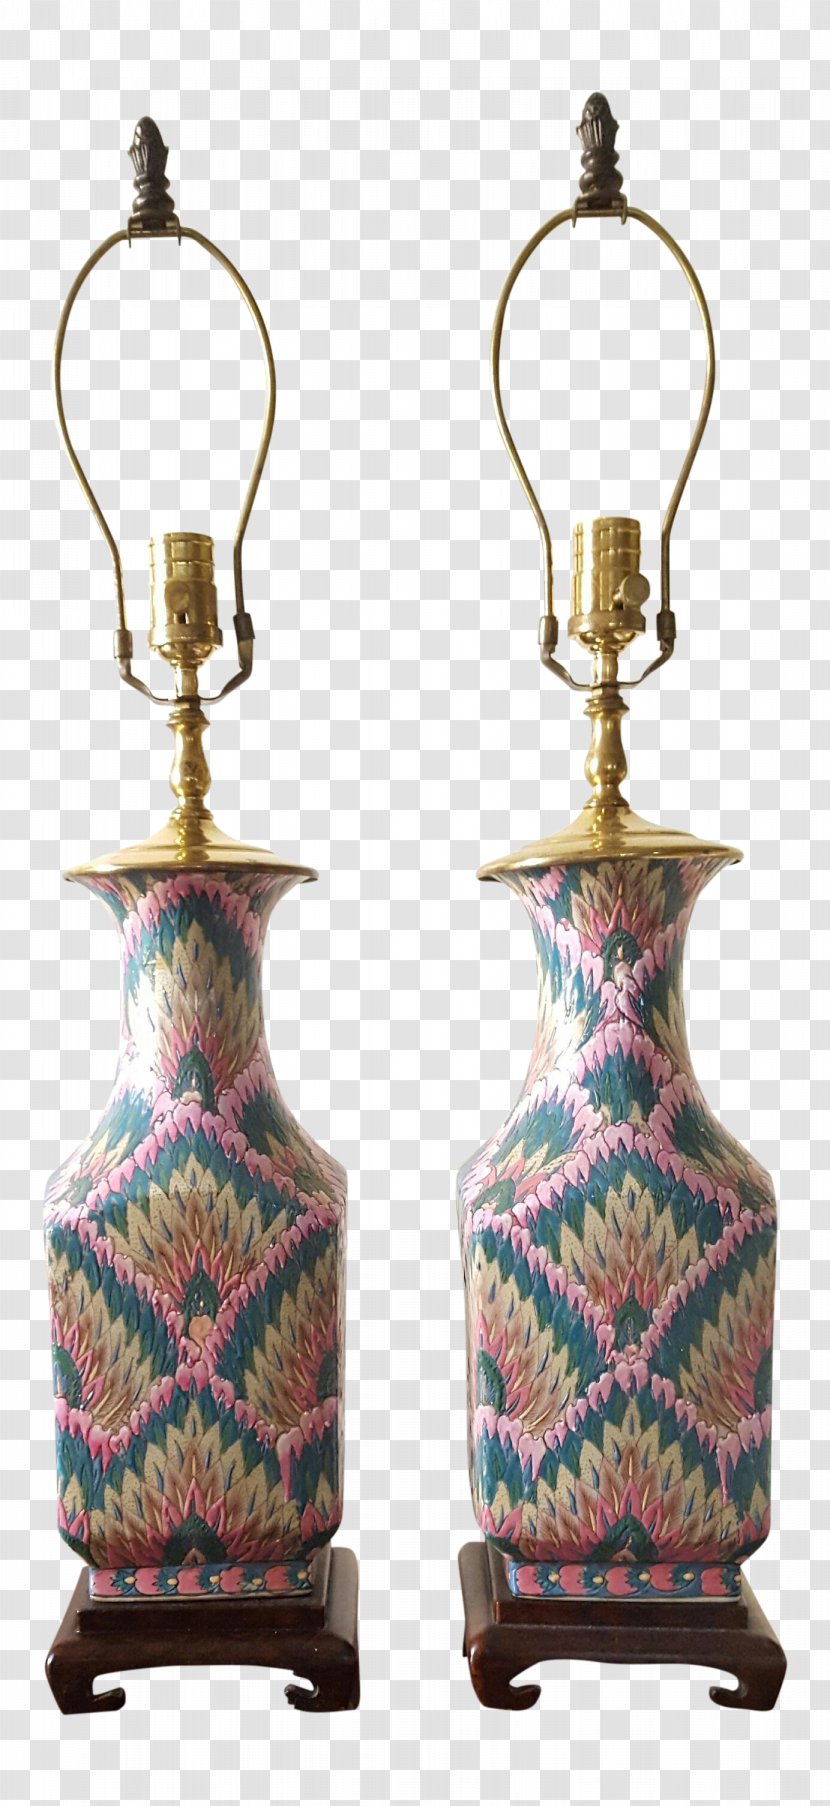 Vase 01504 Artifact - Chinoiserie Transparent PNG